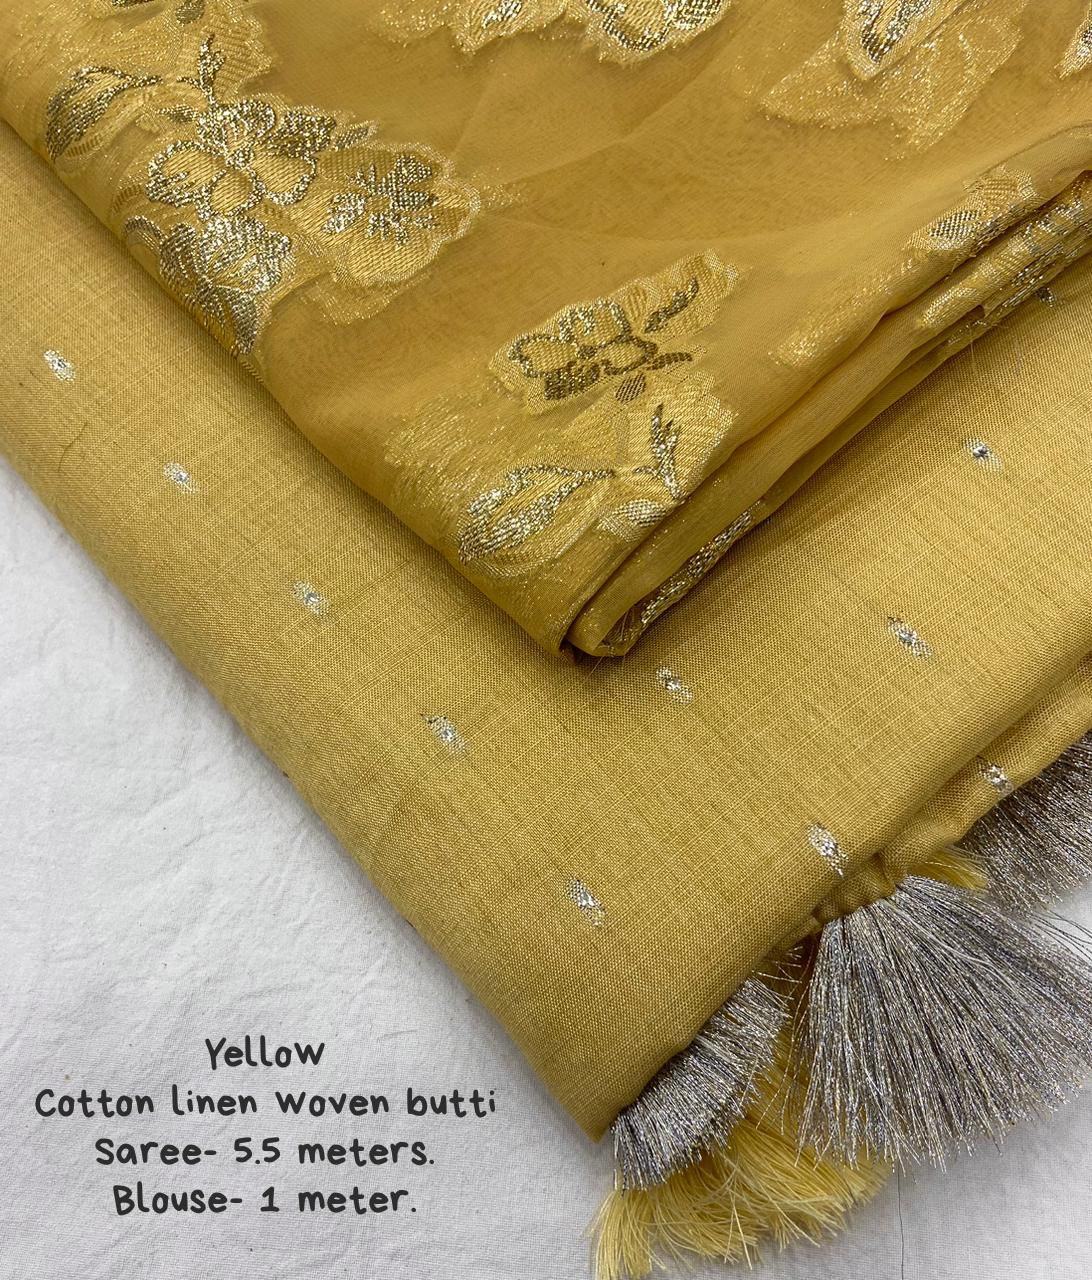 Soft Cotton Linen Saree With Allover Woven Butti And Cotton Tassels On Pallu